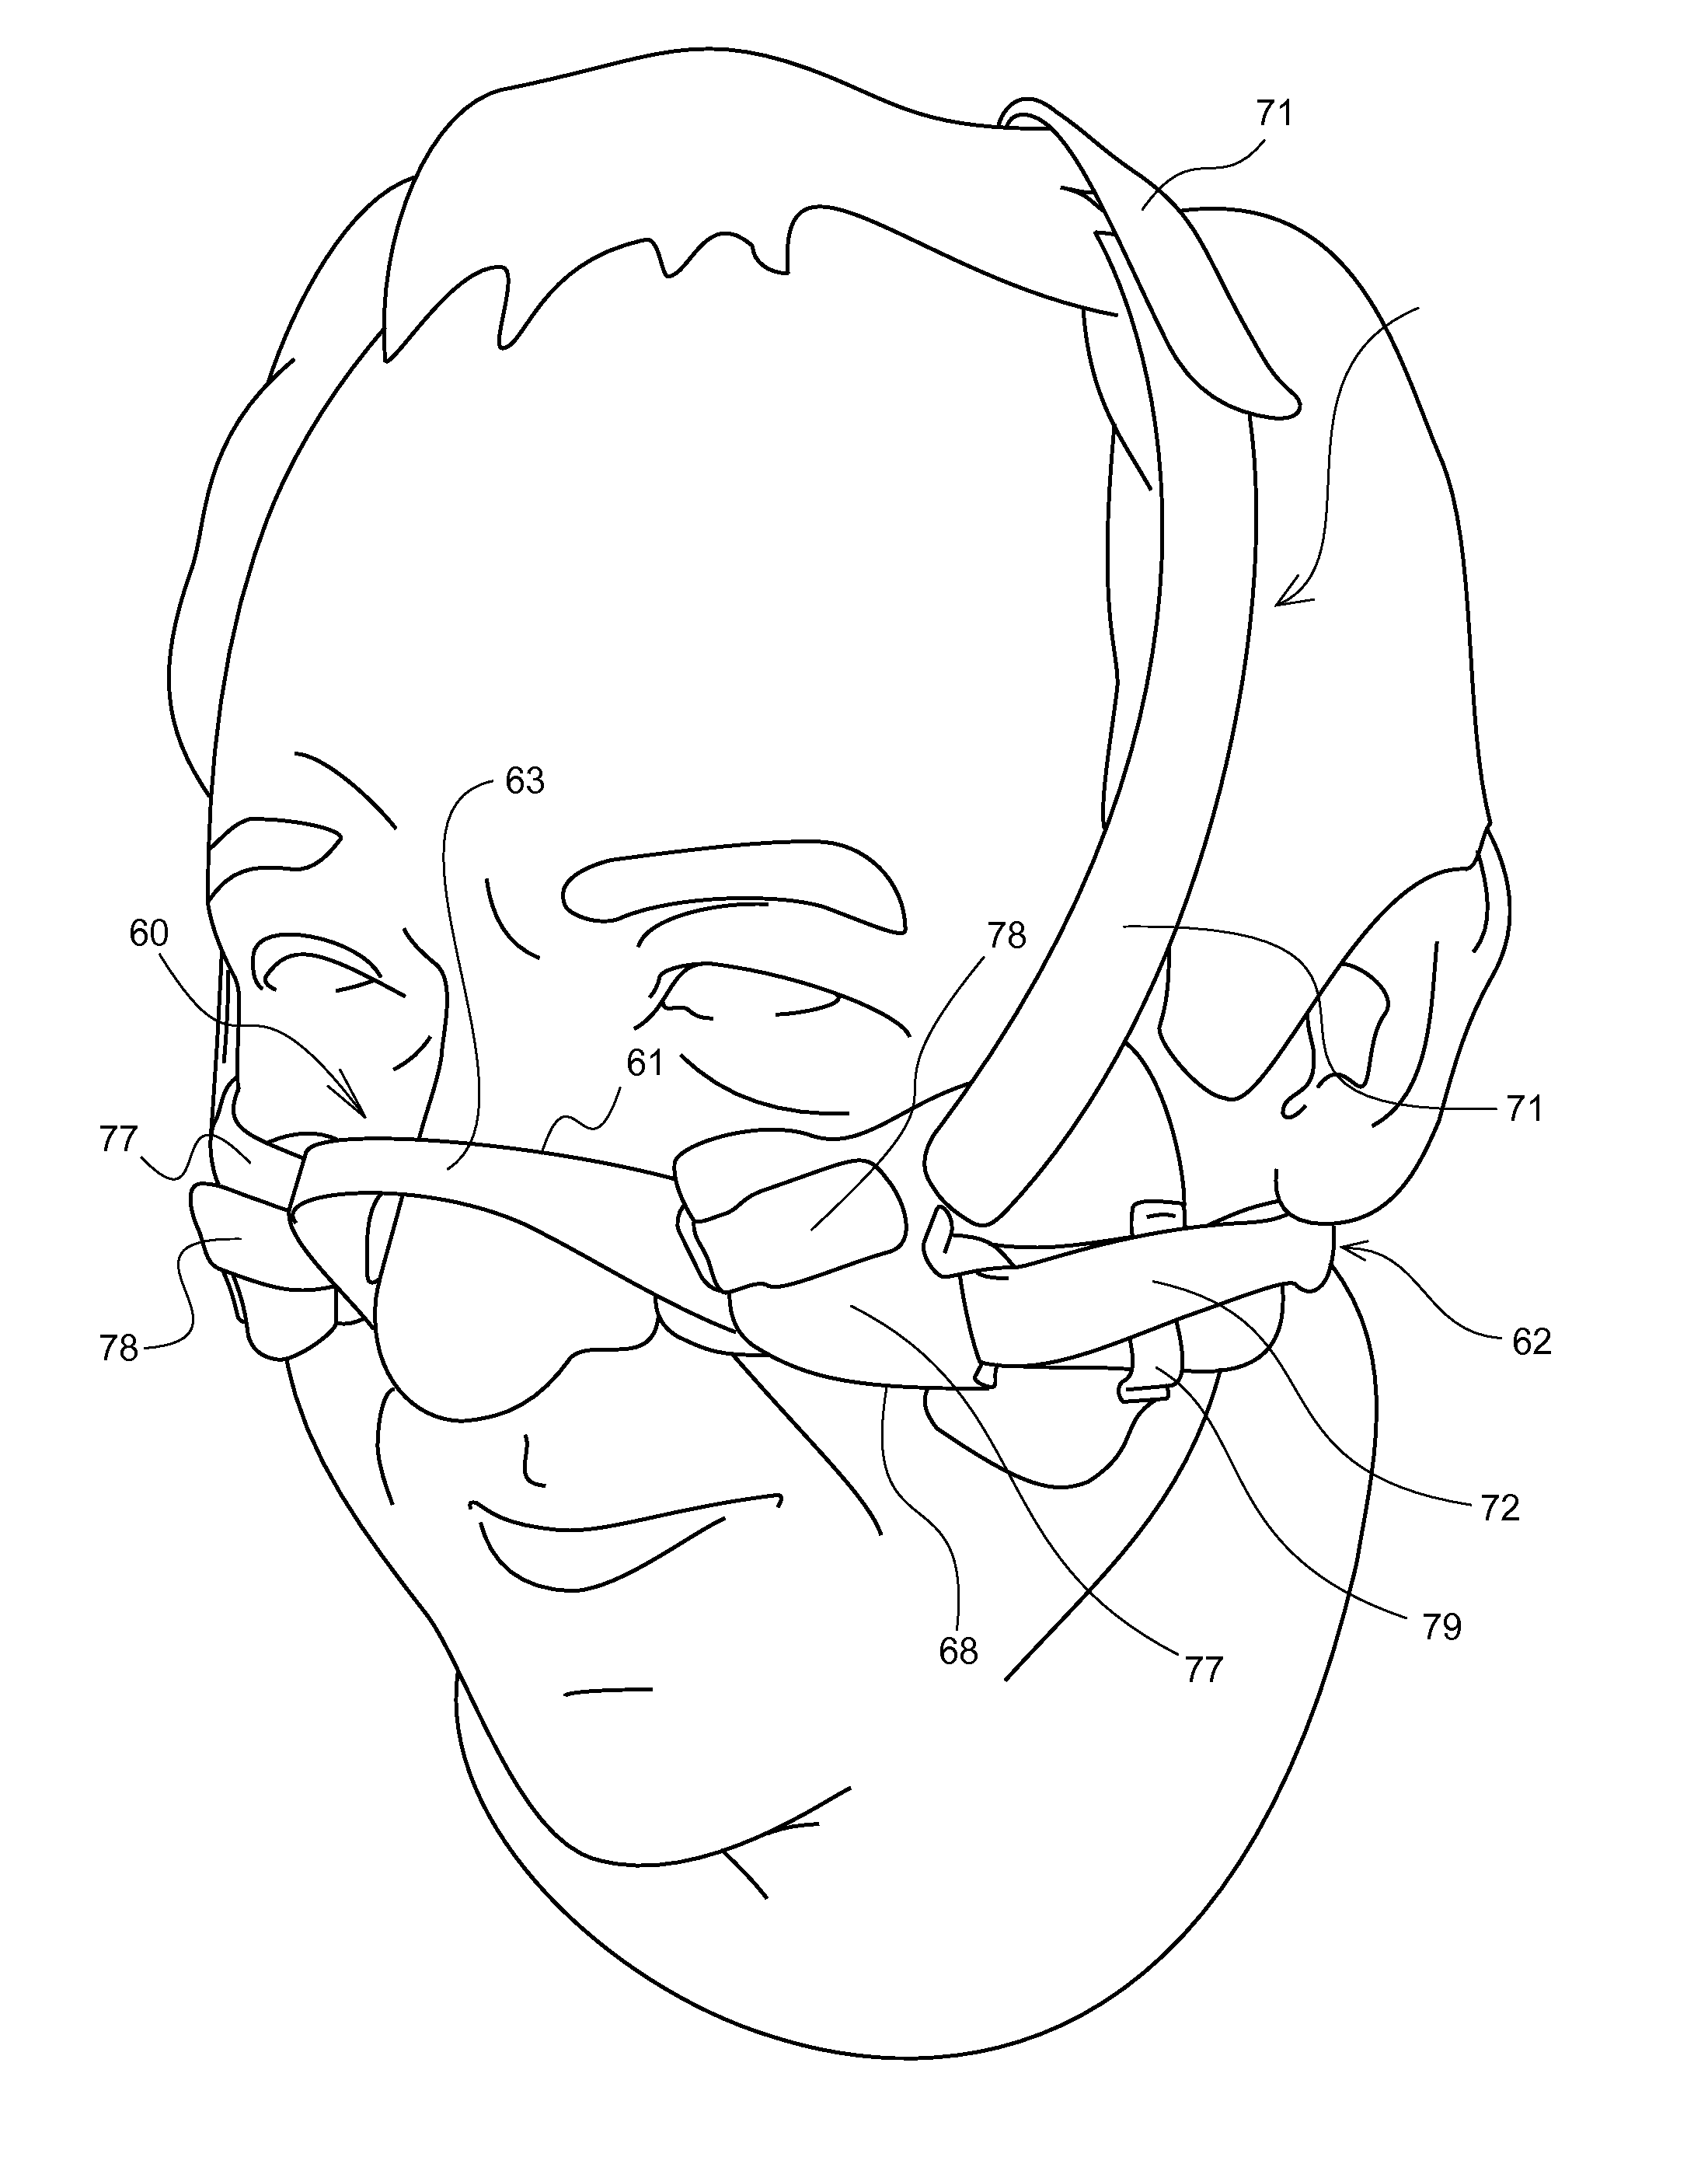 Devices to dilate nasal airways for various applications involving: activities using goggles with a helmet or goggles alone; swimming with goggles, without or with a swim cap; sleep; sleep with a cpap mask; and for physical activities